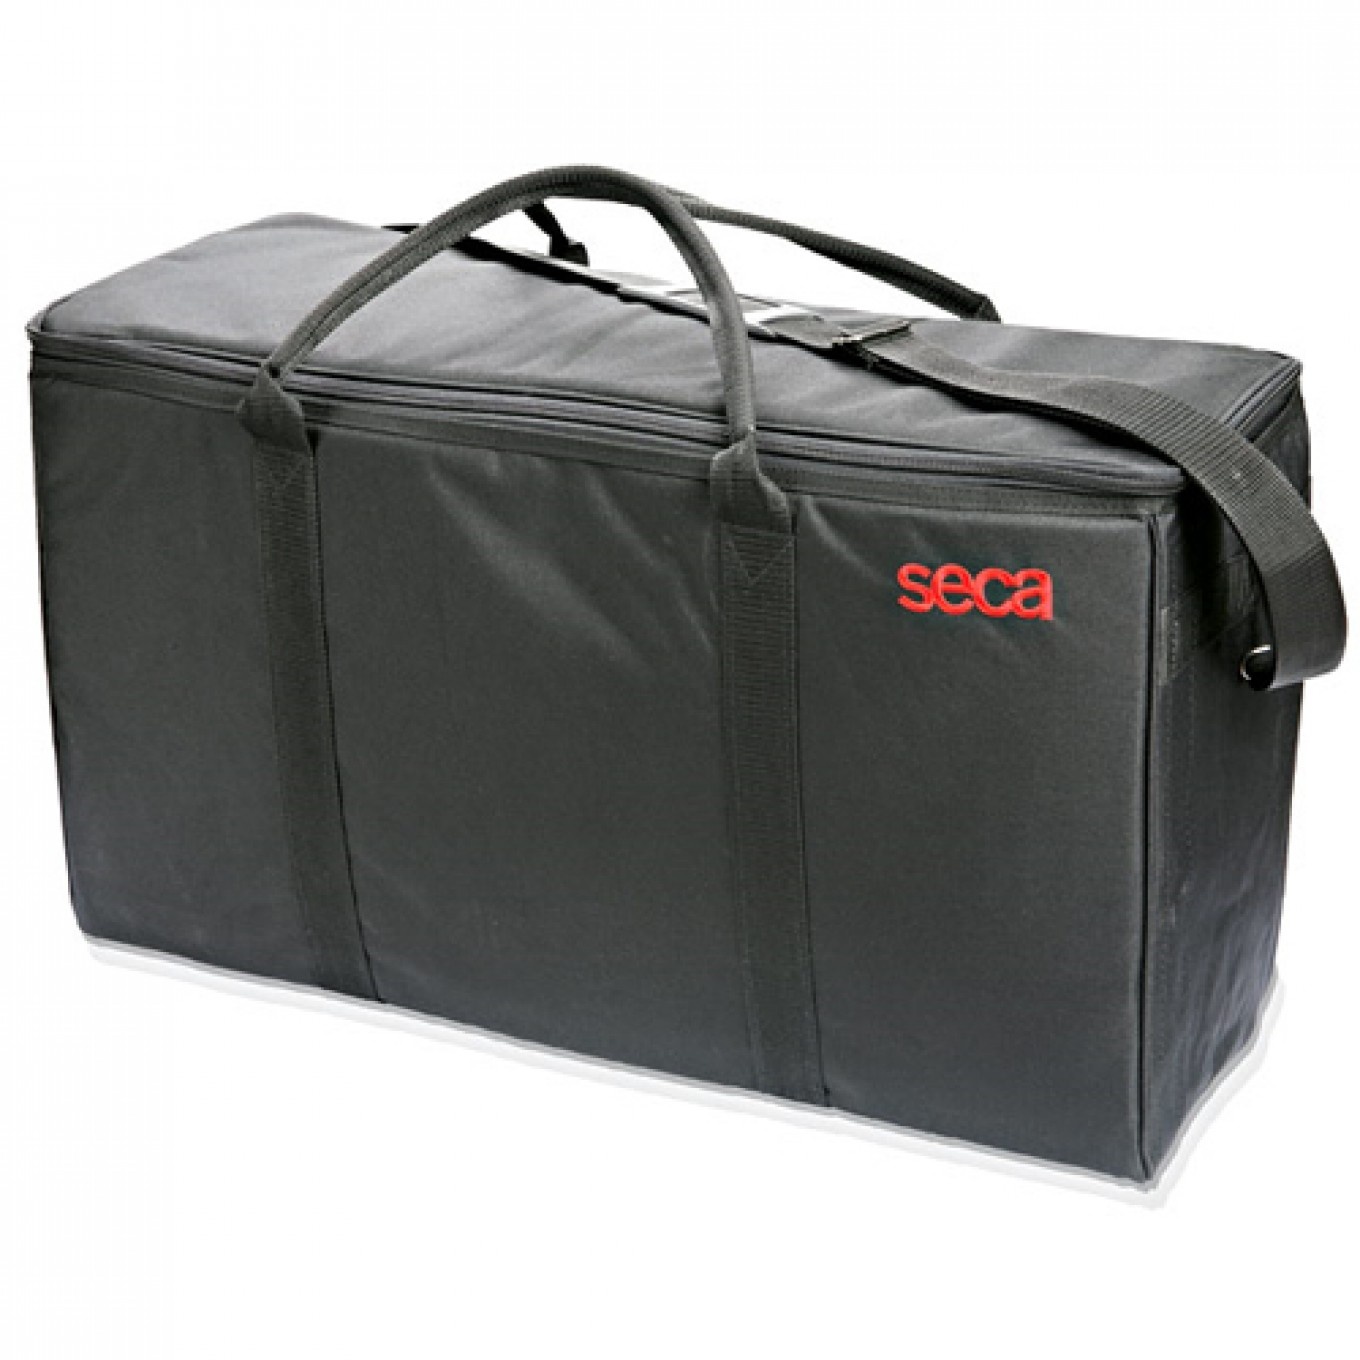 Seca Carry Bag for (ESE354 + ESE417) and (ESE876 + ESE437 +ESE217)